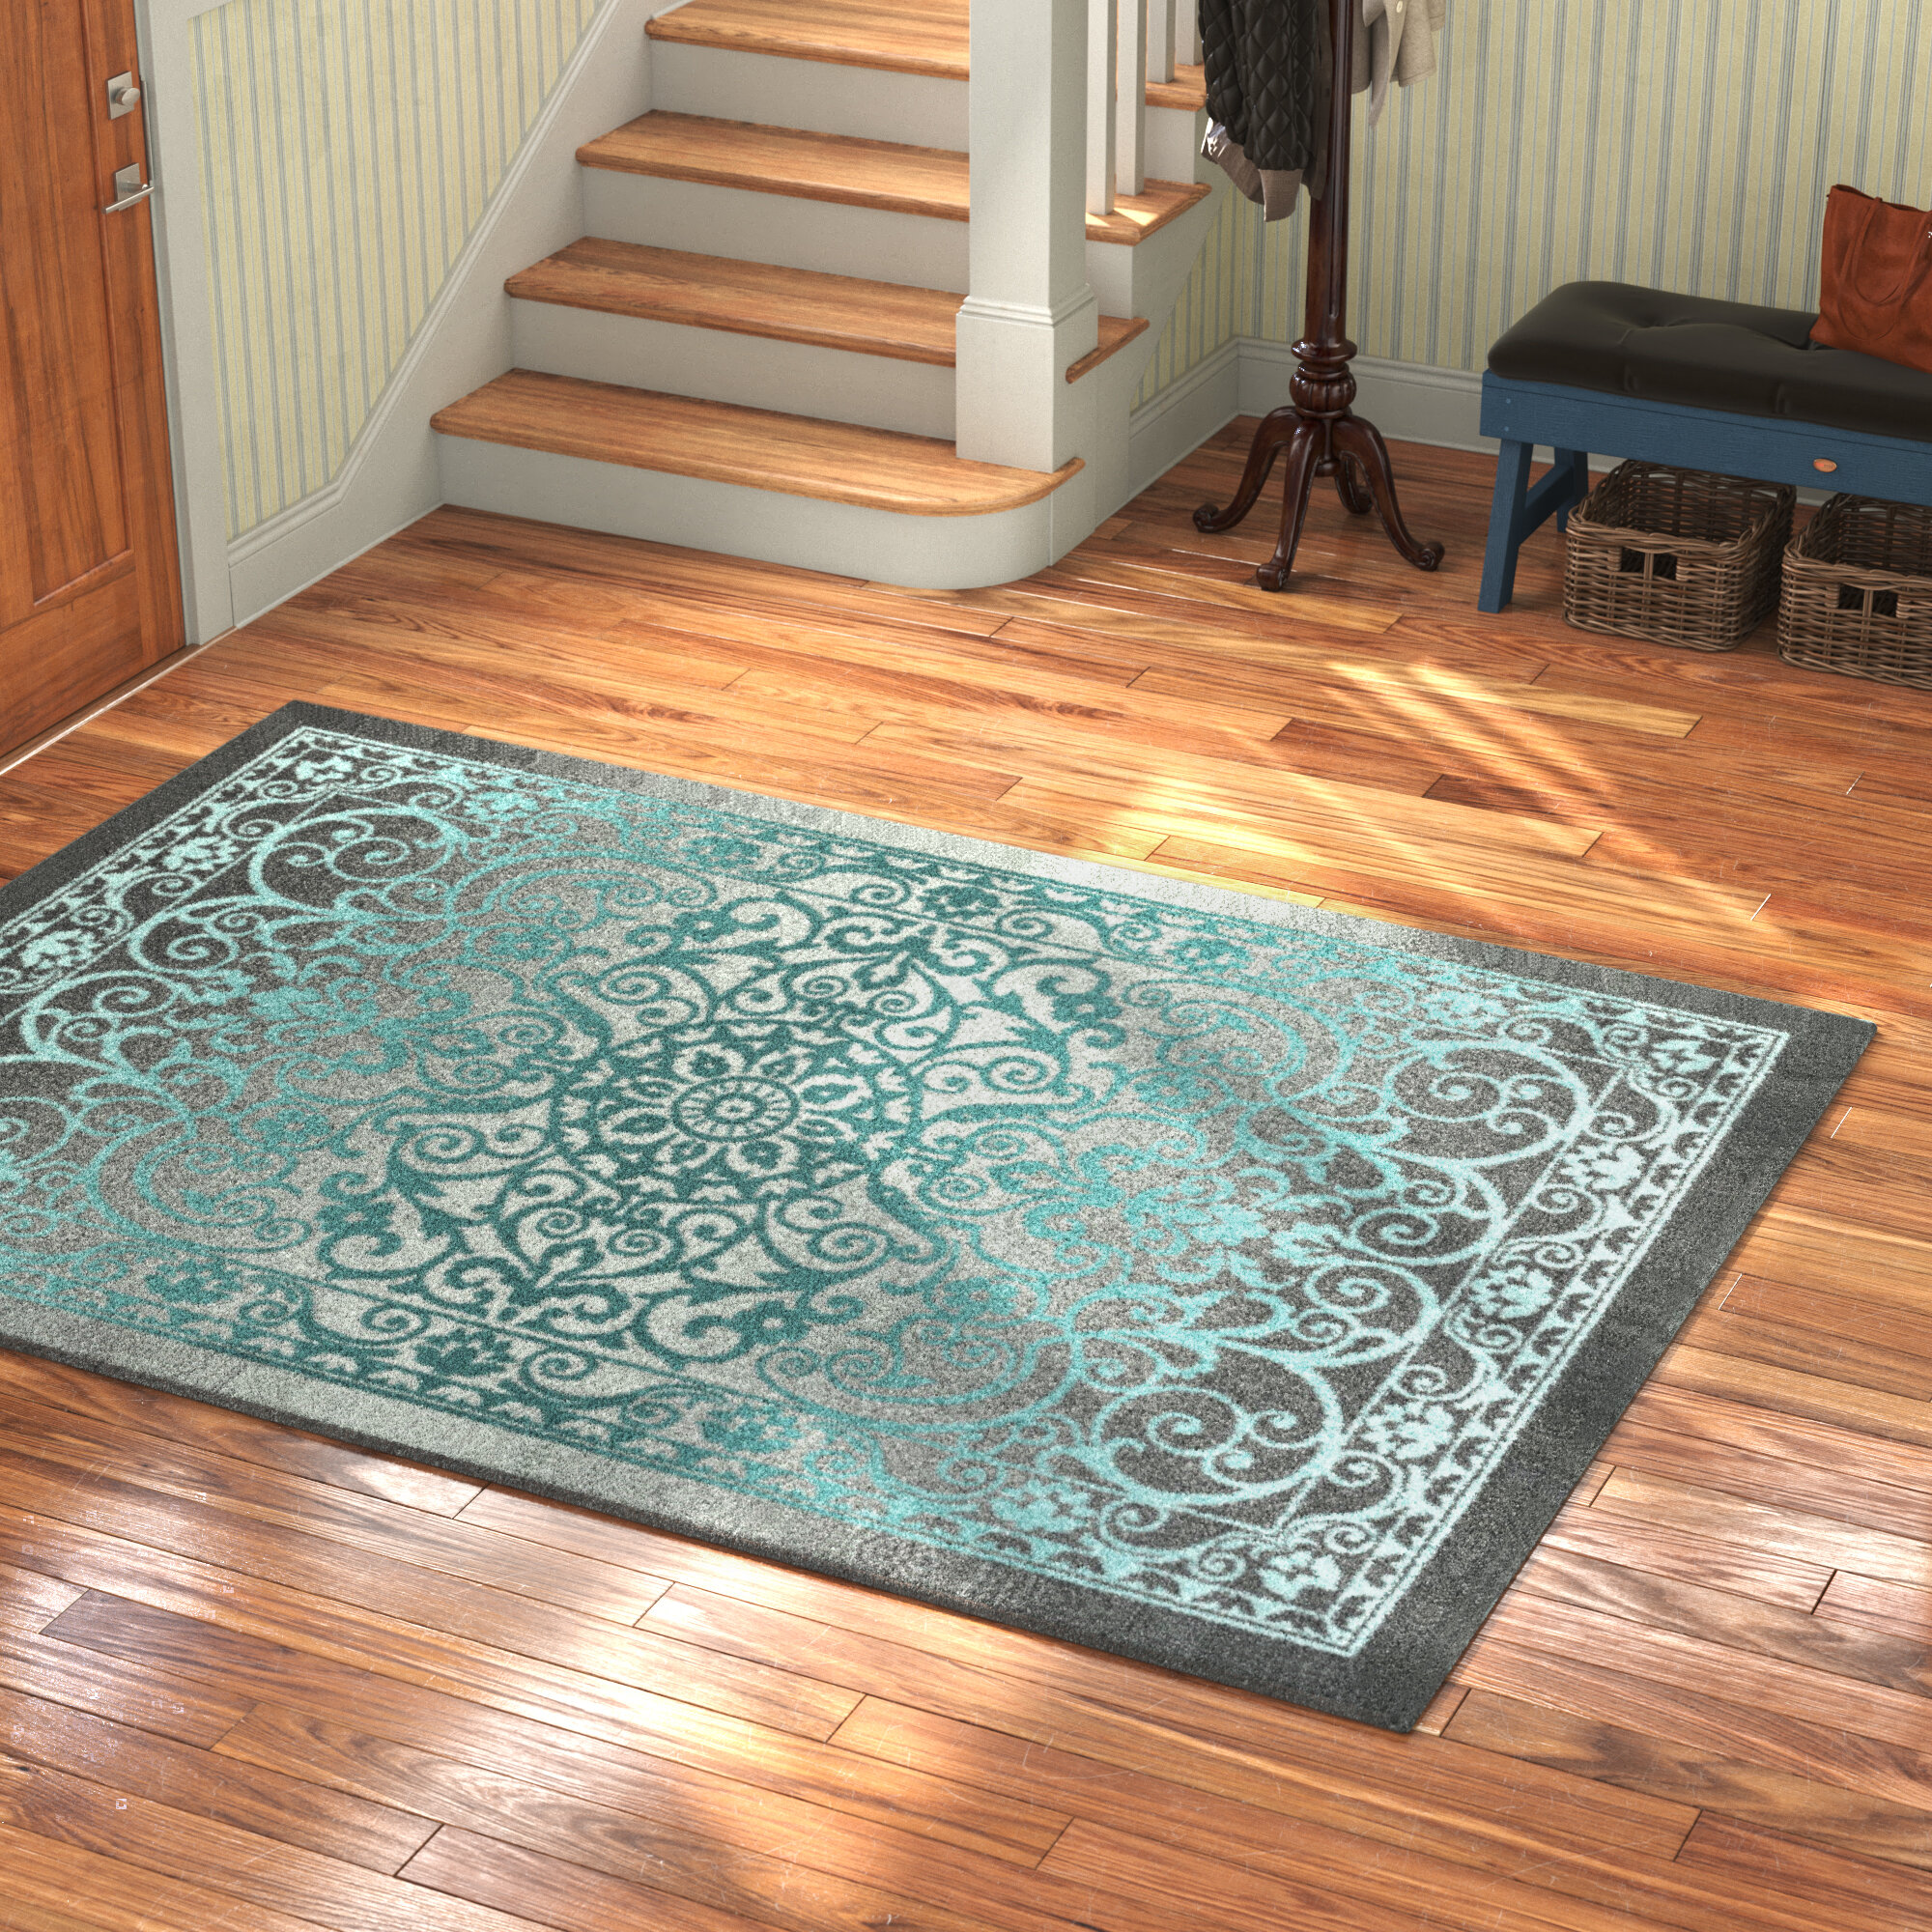 Non-Slip Floor Mat Washable Runner Rug for Kitchen Hallway Entryway Living Room Bedroom Dorm Home Decor ALAZA Dragonfly Butterfly Flower Area Rug 39 x 20 Inch 